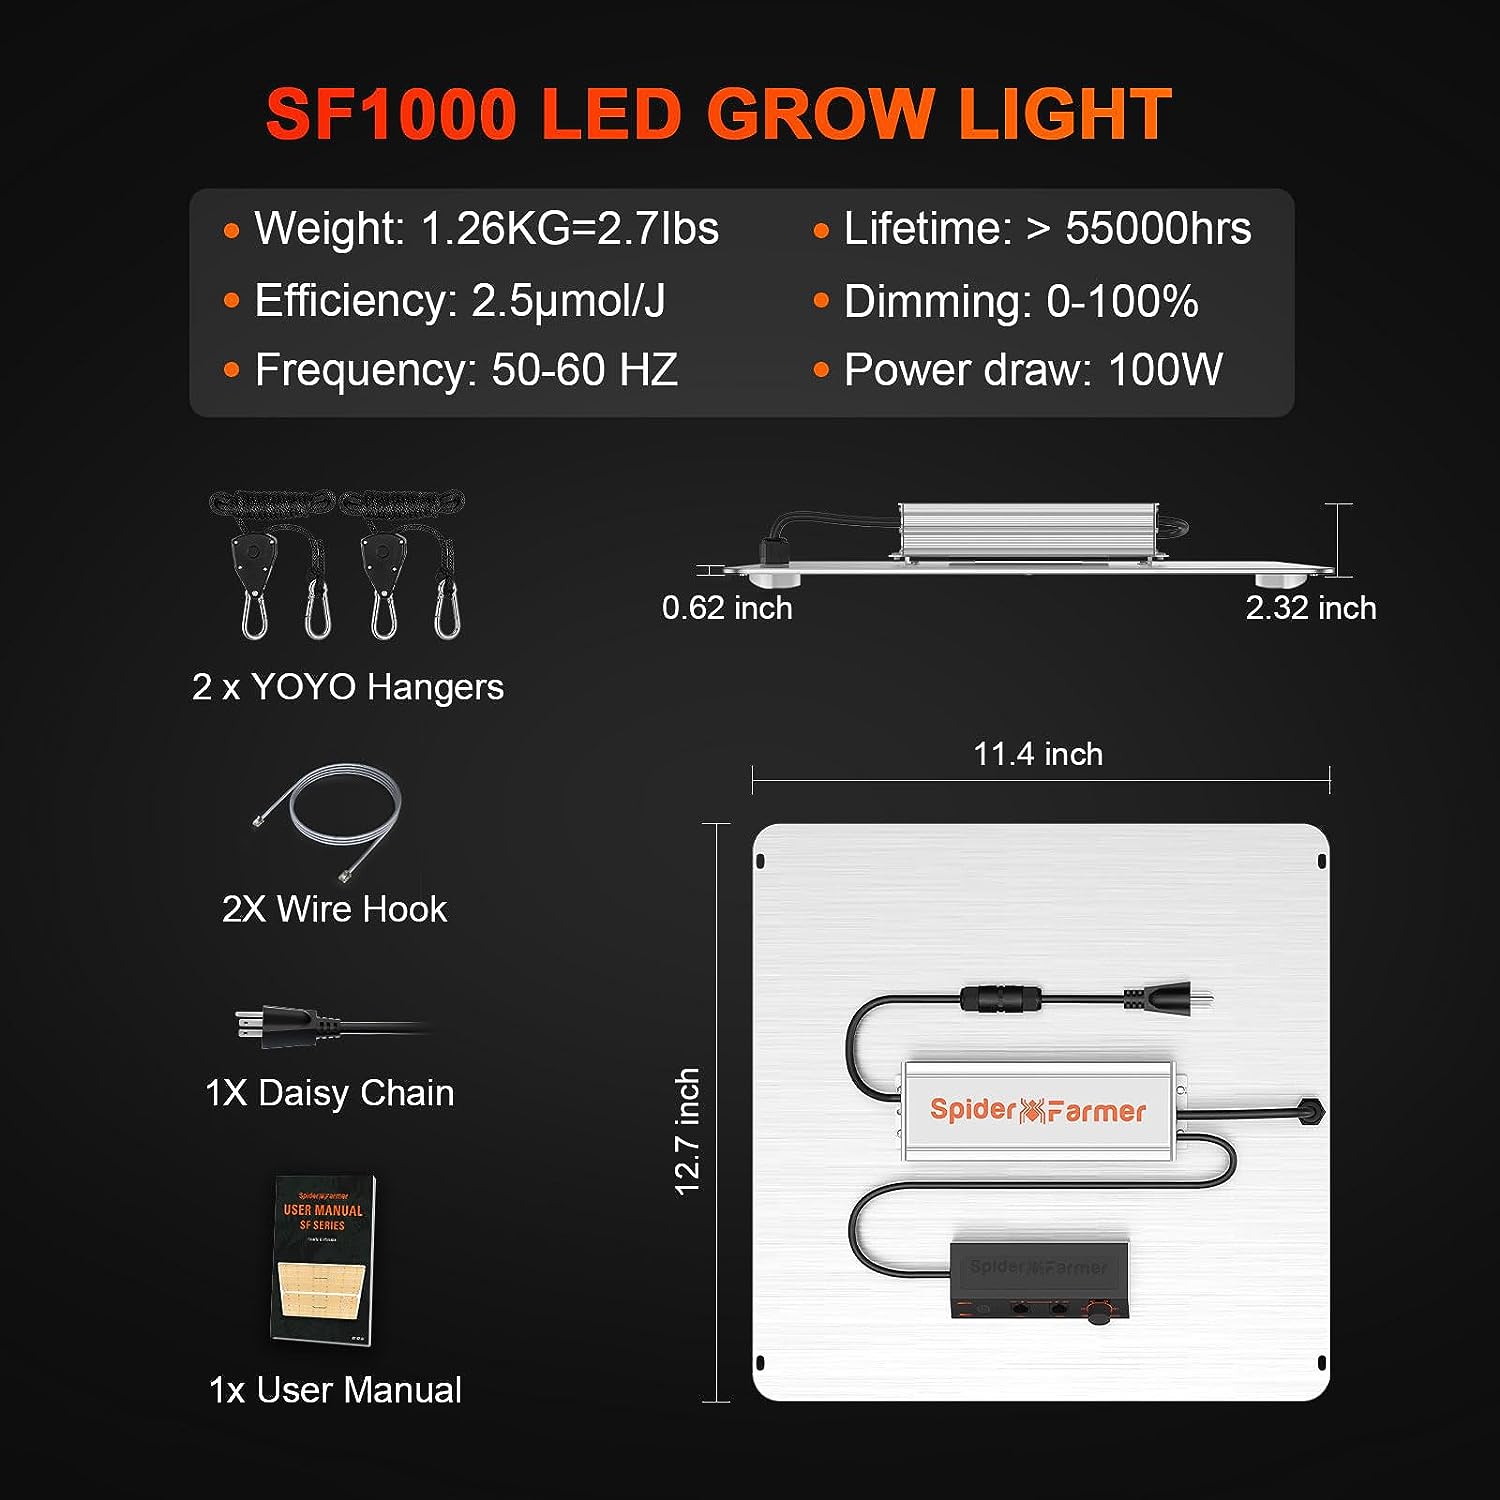 2023 Newest Spider Farmer SF1000 LED Grow Light with Samsung LM301B Diodes Deeper Penetration  Dimmable Full Spectrum Lights for Indoor Plants Veg Bloom Growing Lamps for 3x3/2x2 Grow Tent 2.5 umol/J